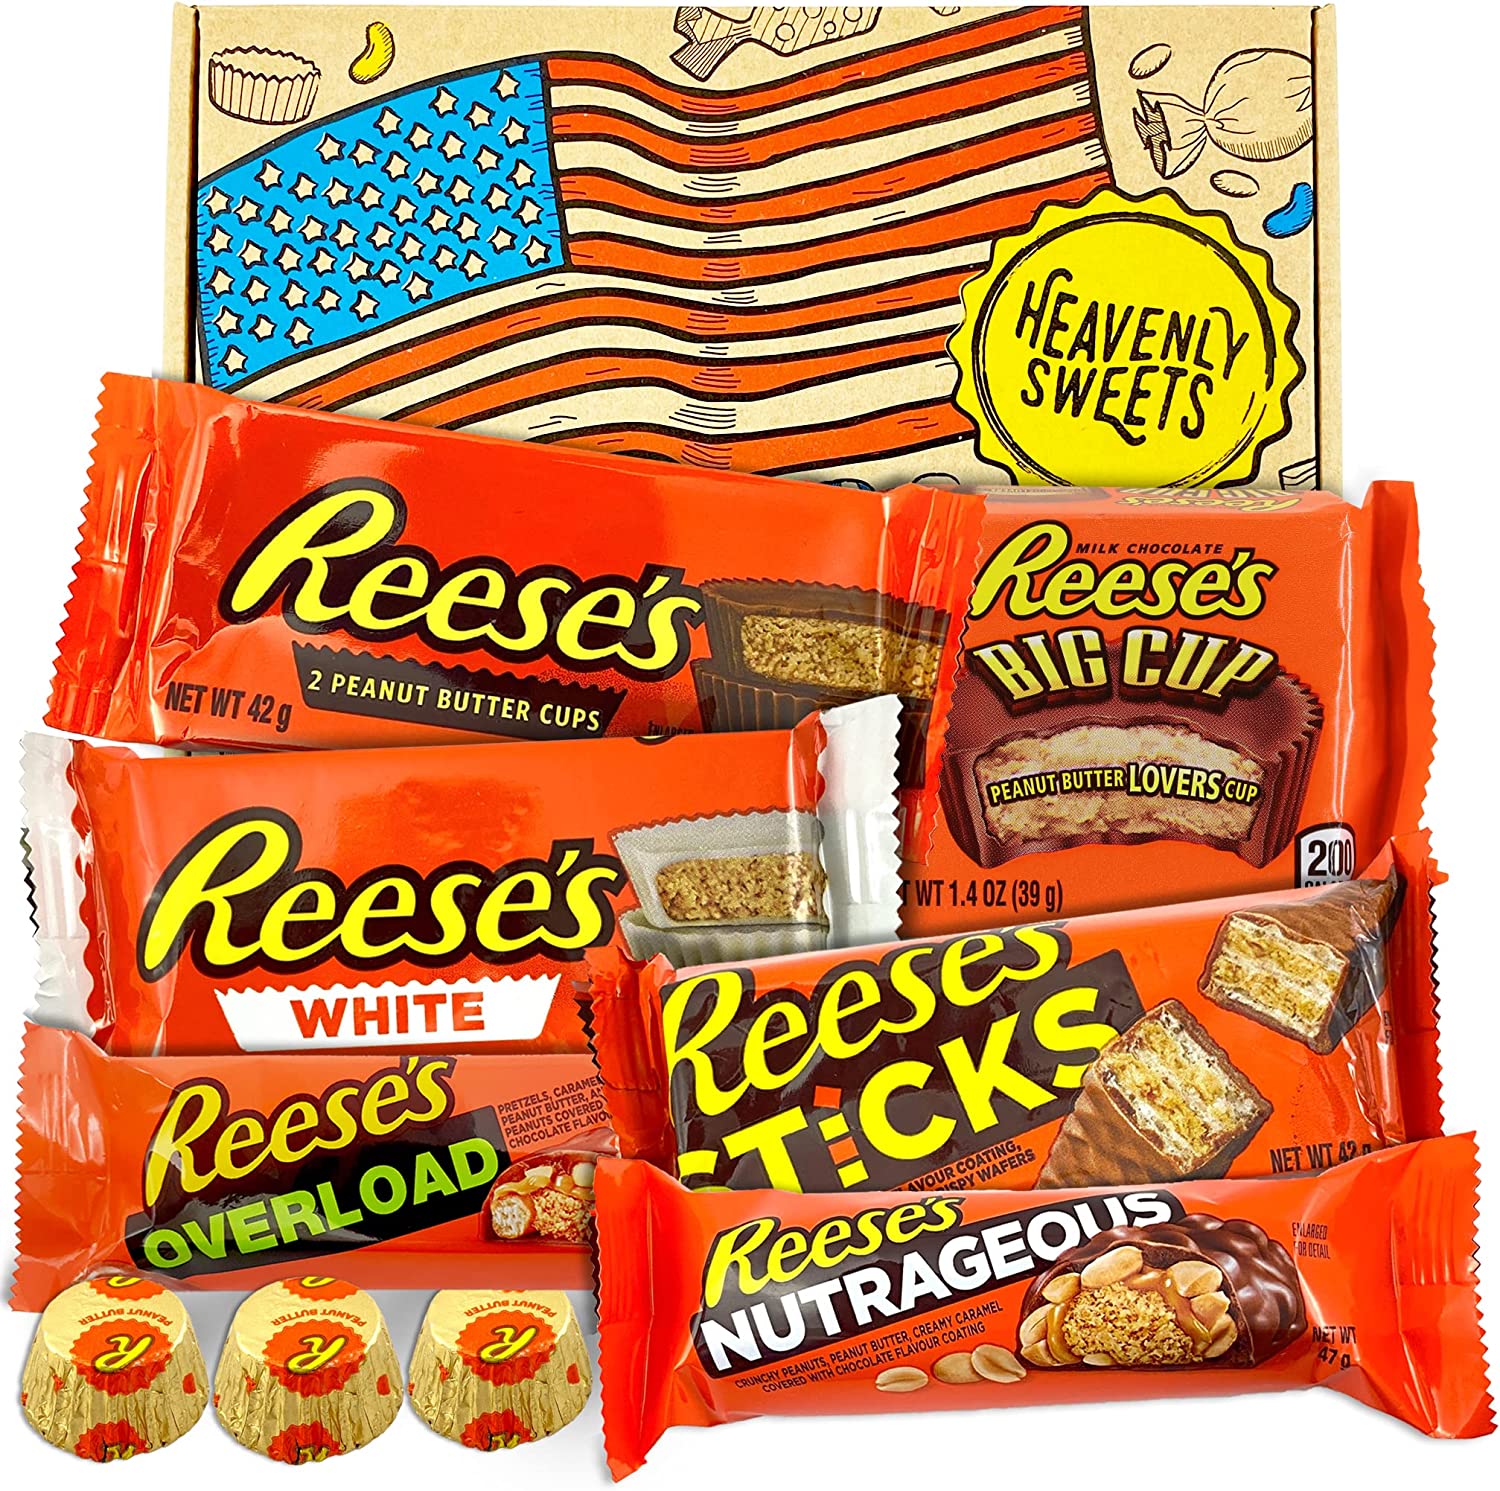 Indulge in the ultimate American candy experience with our Reese's Candy Hamper. Packed with an assortment of peanut butter and chocolate delights from Reese's, this hamper is a sweet lover's dream. Perfect for gifting or treating yourself, it's your ticket to peanut butter and chocolate paradise. Explore the iconic flavors of Reese's today!